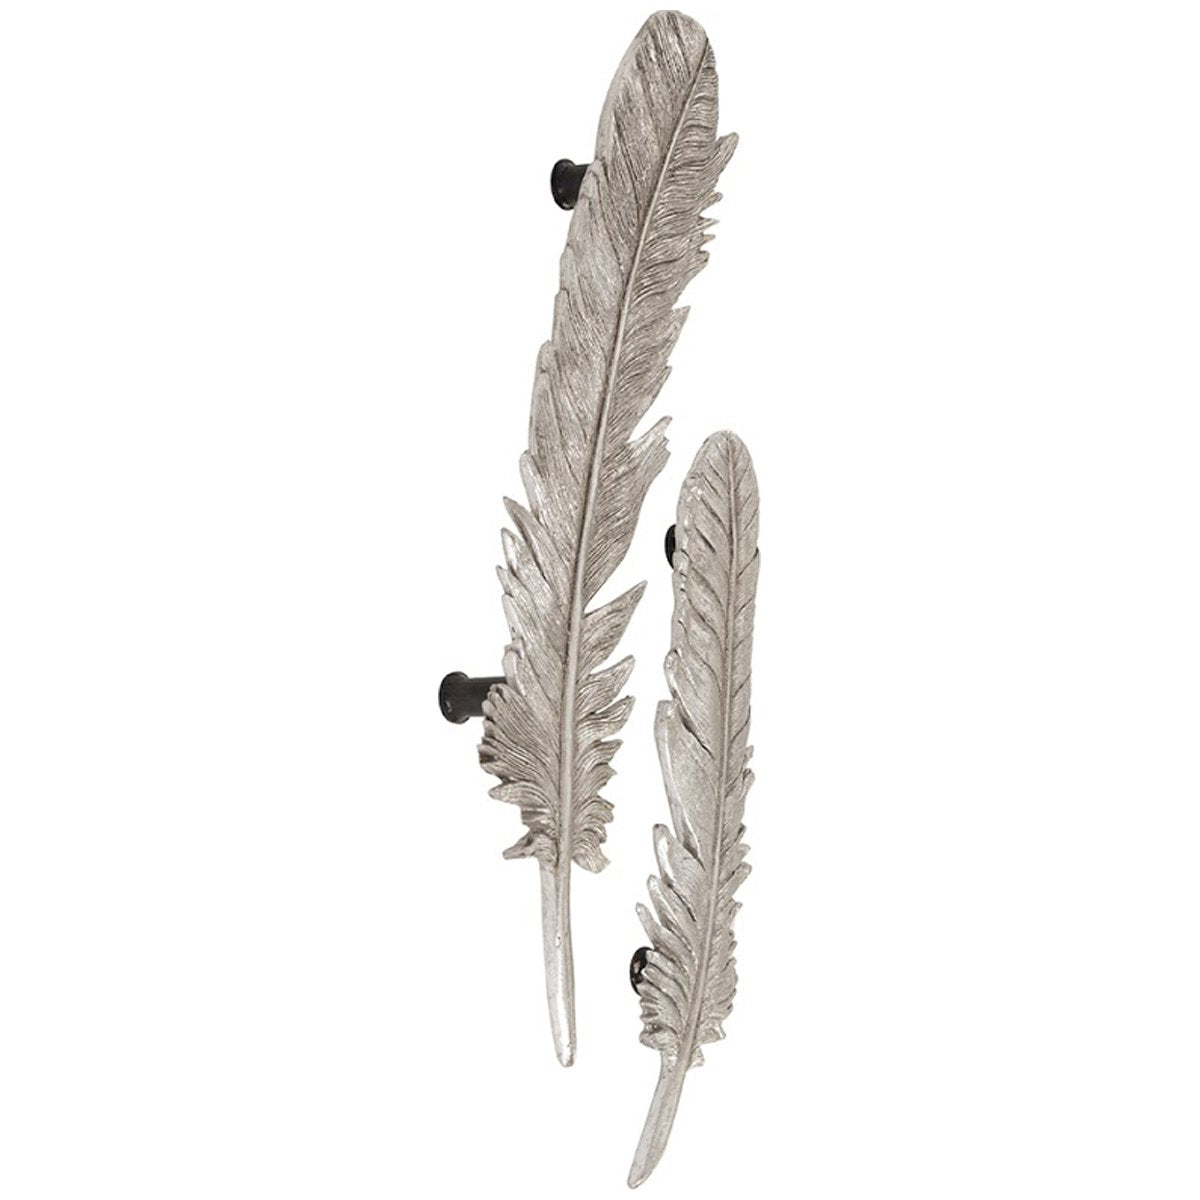 Phillips Collection Feathers Wall Art, 2-Piece Set